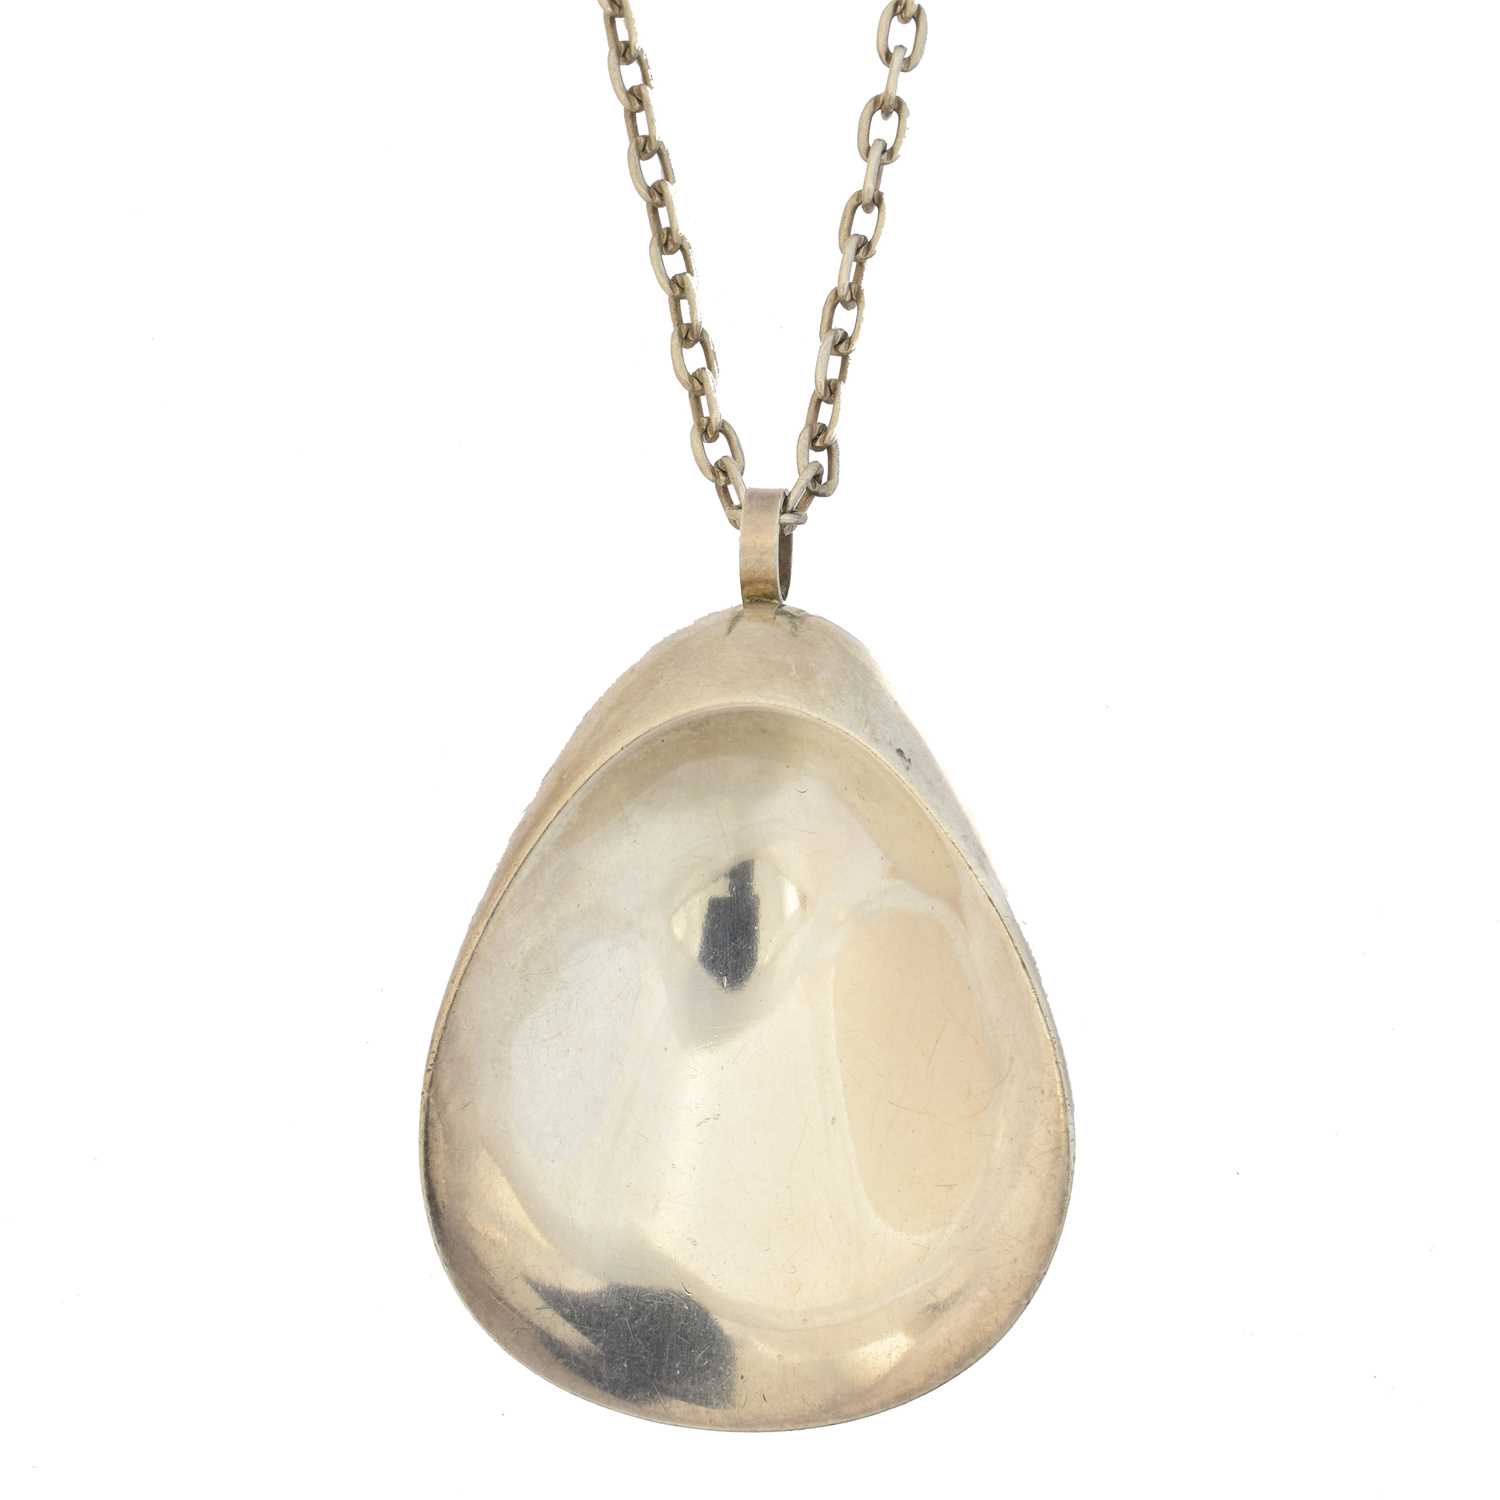 Lot 76 - A Georg Jensen 'Oyster' pendant on chain, no. 328